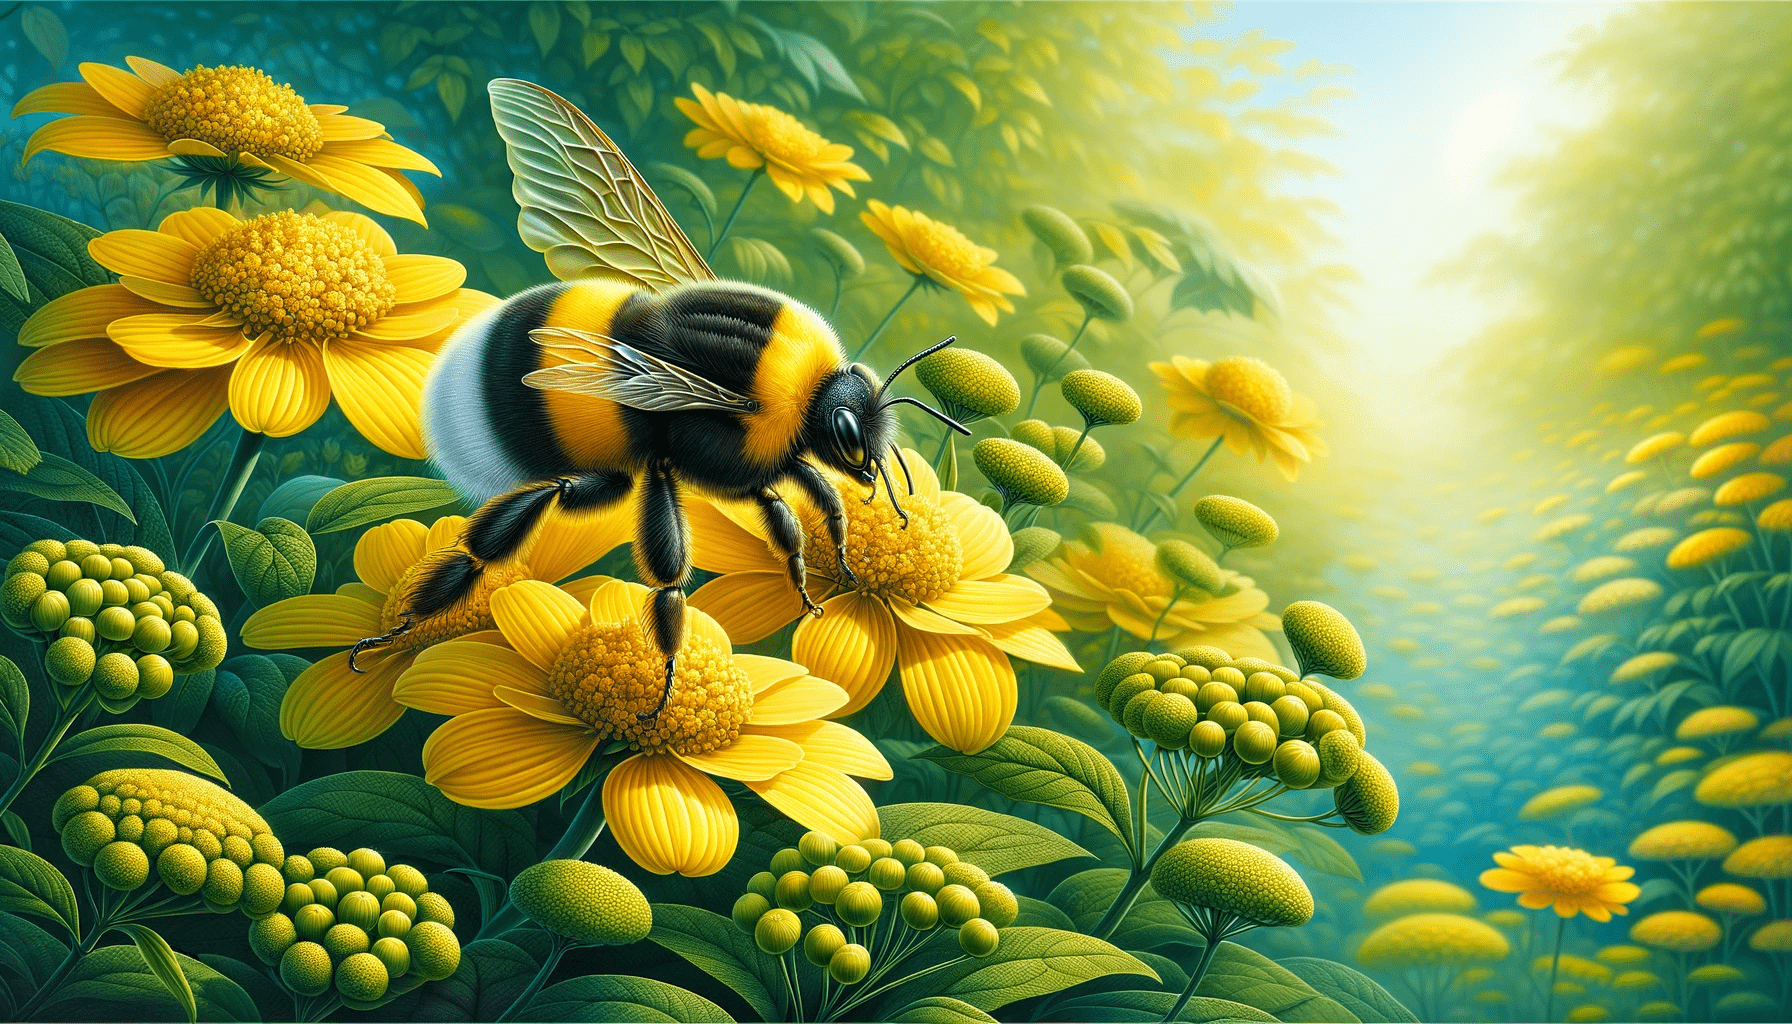 Bumblebee - things that are yellow and back